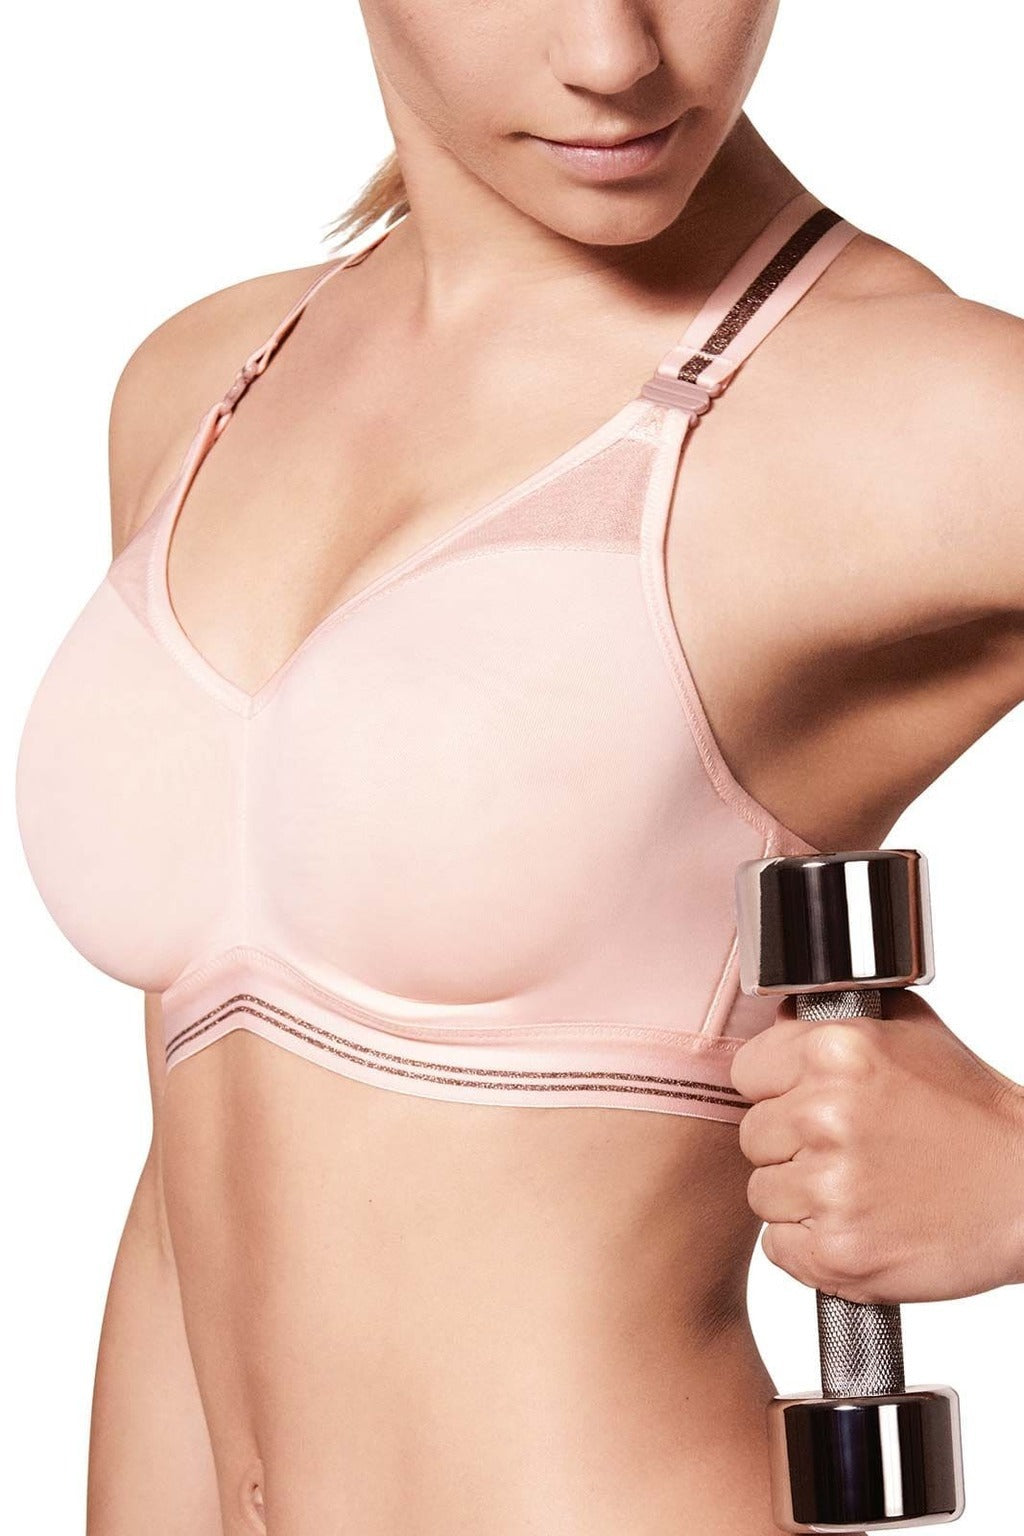 QIPOPIQ Clearance Bras for Women, Woman Sexy Sports Bra Without Steel Rings  Sexy Everyday Bras Vest Lingerie Underwear 